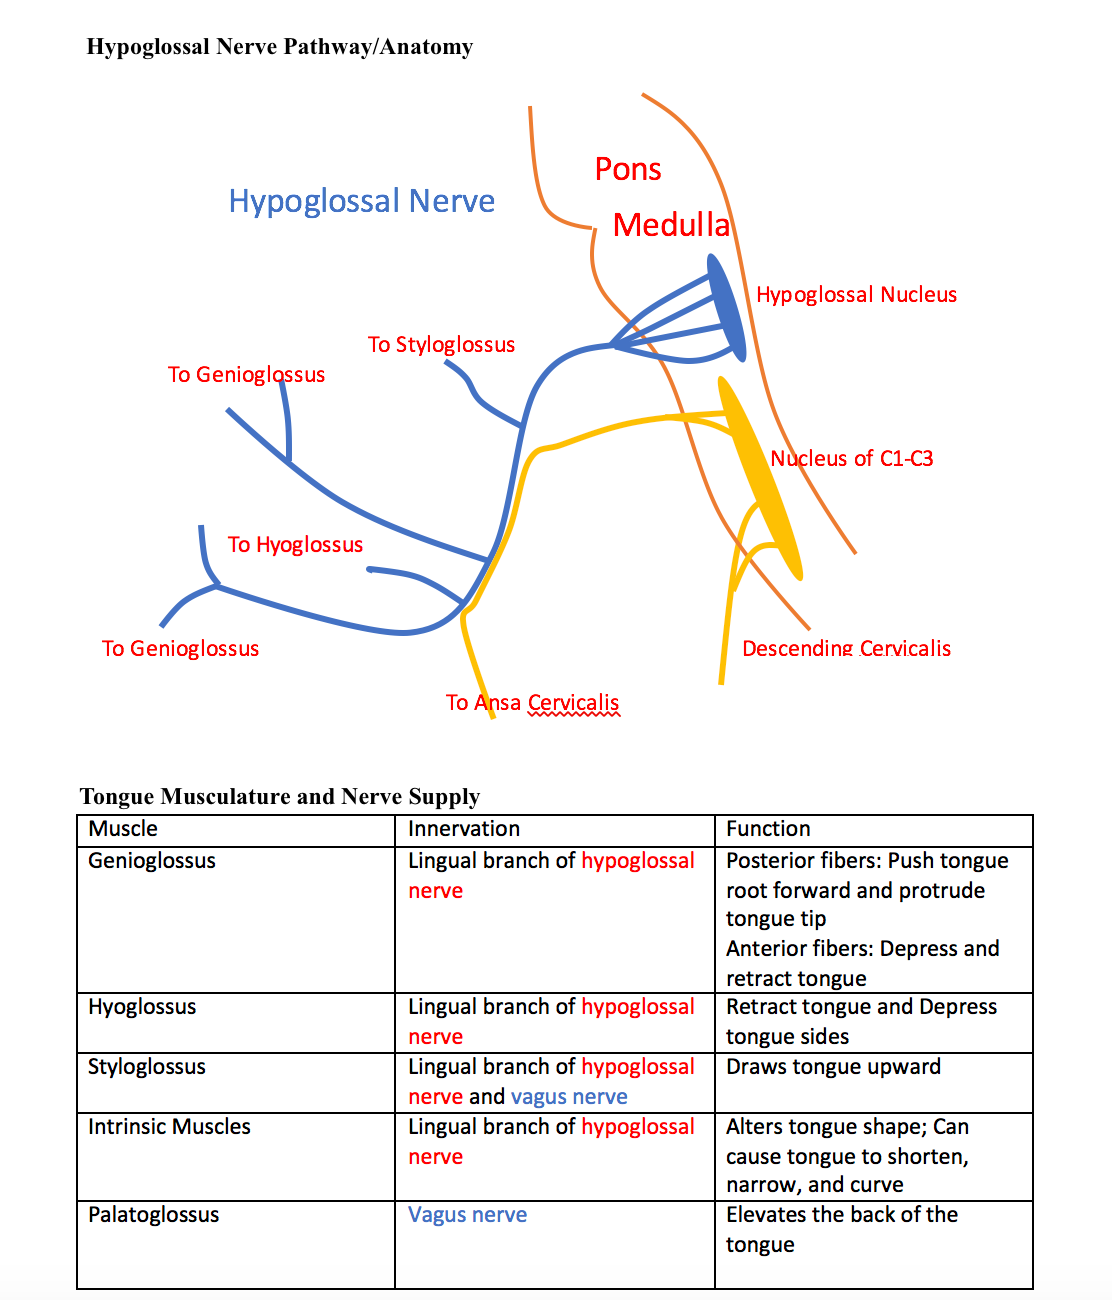 Figure 1: Hypoglossal Pathway/Anatomy
Table 1: Tongue Musculature and Nerve Supply